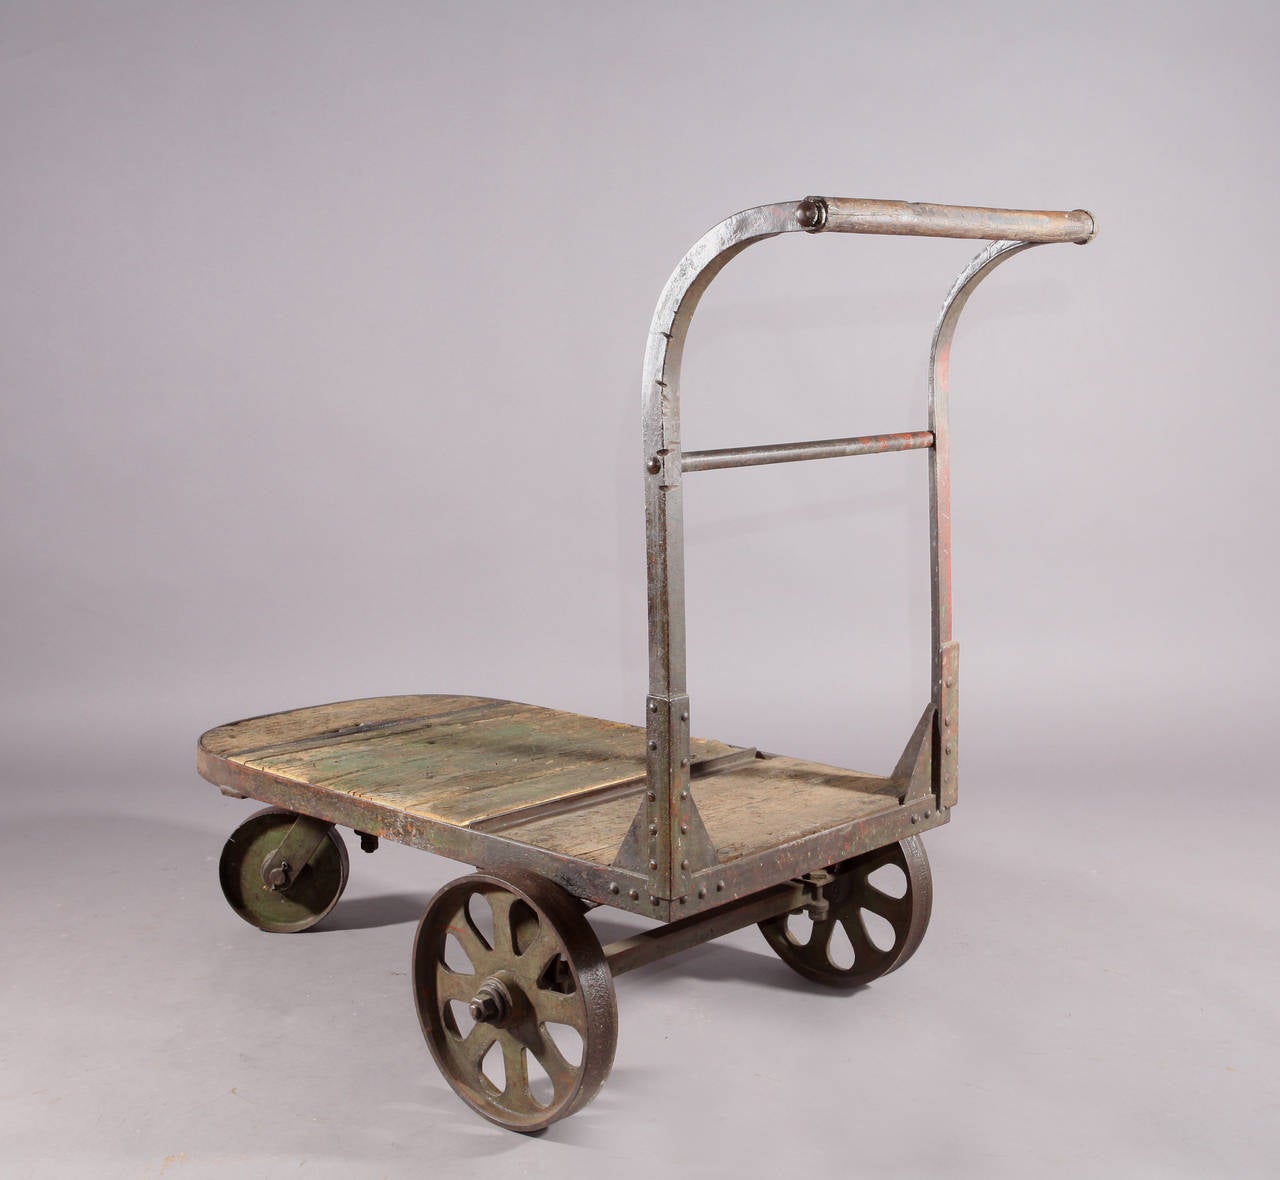 Rolling Industrial cart,
early 20th century.
Cast iron wheels.
Iron wheels and frame or wooden plate.
An original piece of history.
Measures: Length 551/8